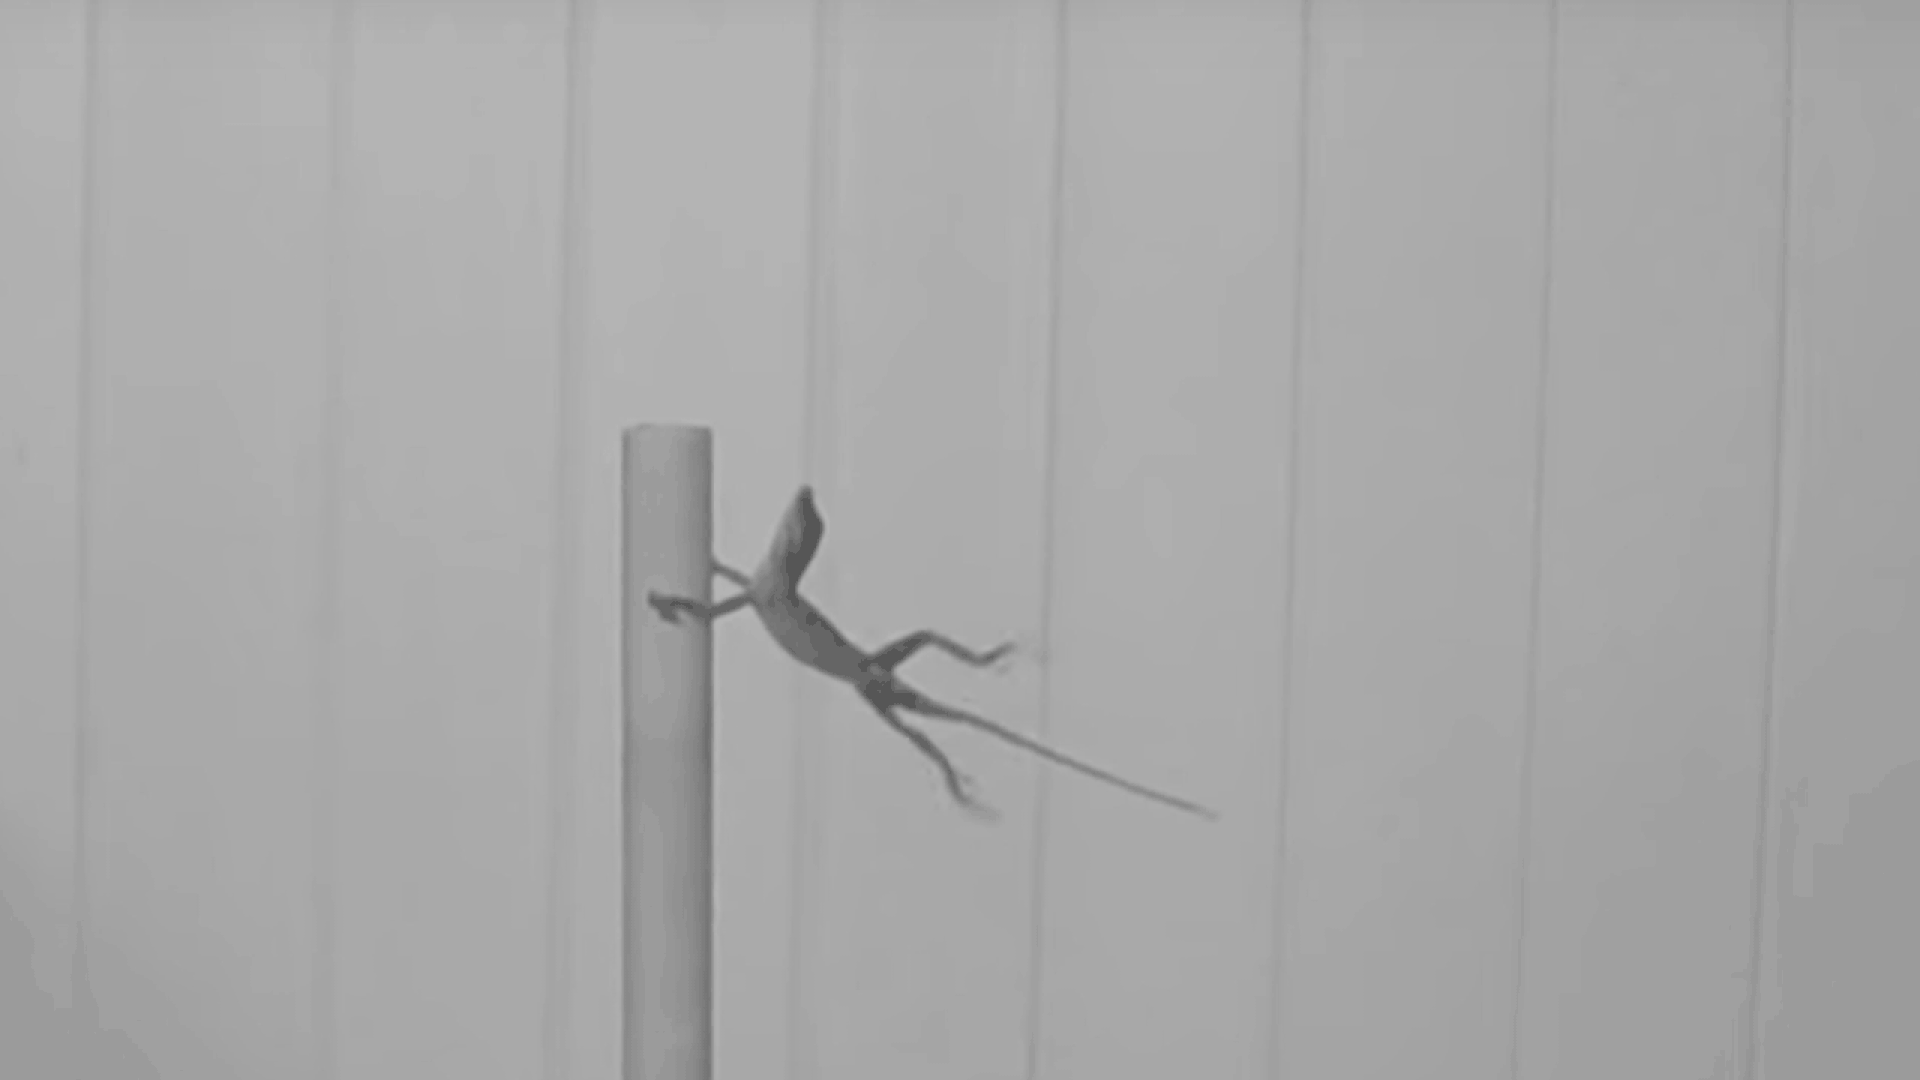 Lizard responding to high winds by clinging to a perch.